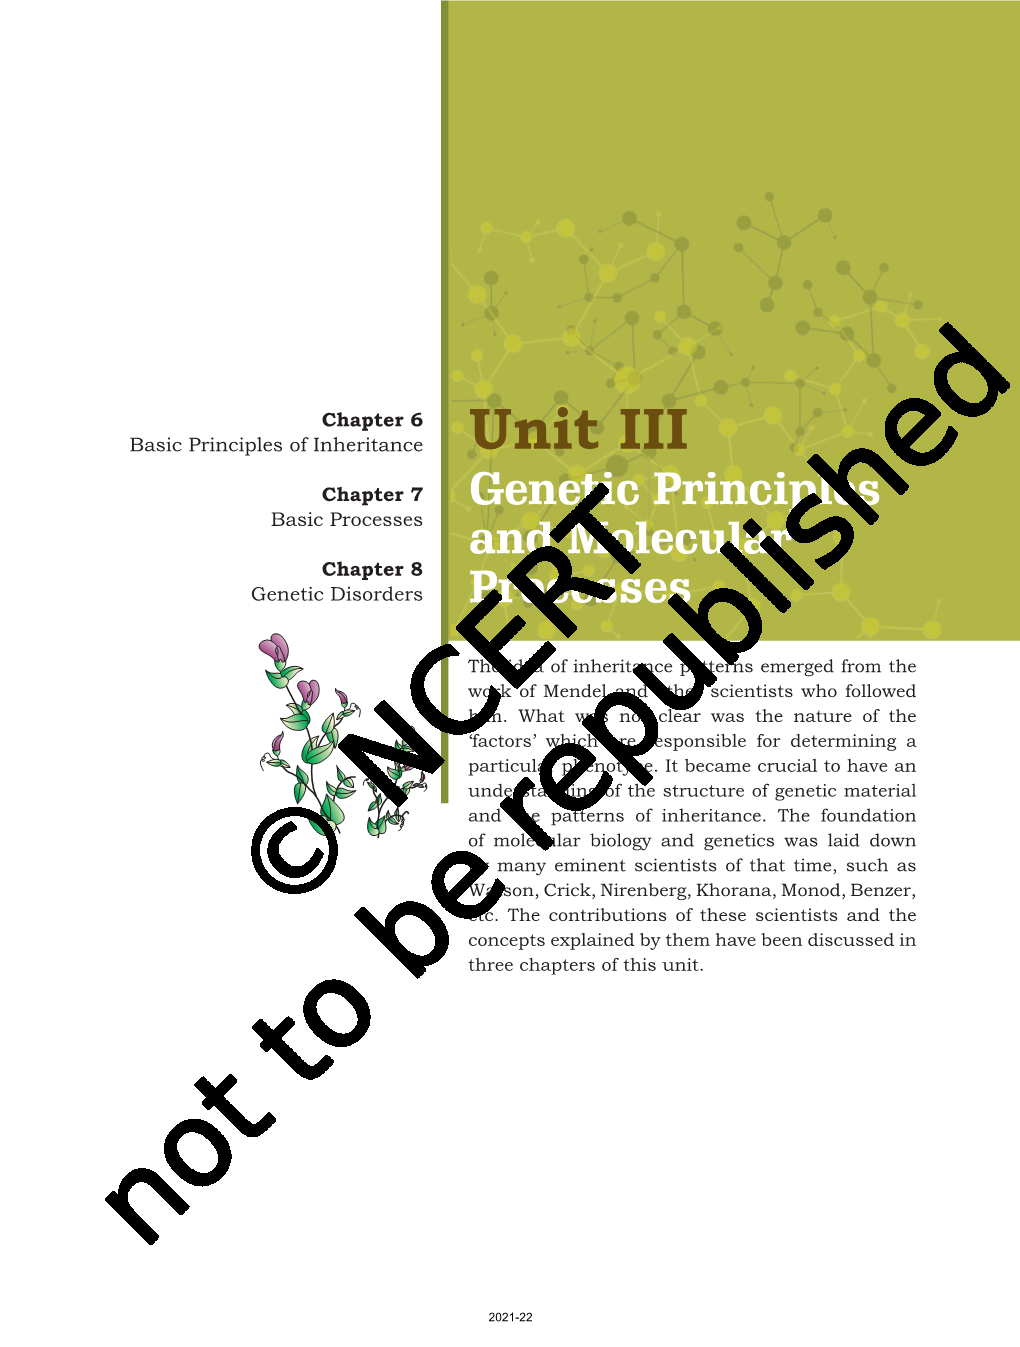 Unit III Chapter 7 Genetic Principles Basic Processes and Molecular Chapter 8 Genetic Disorders Processes